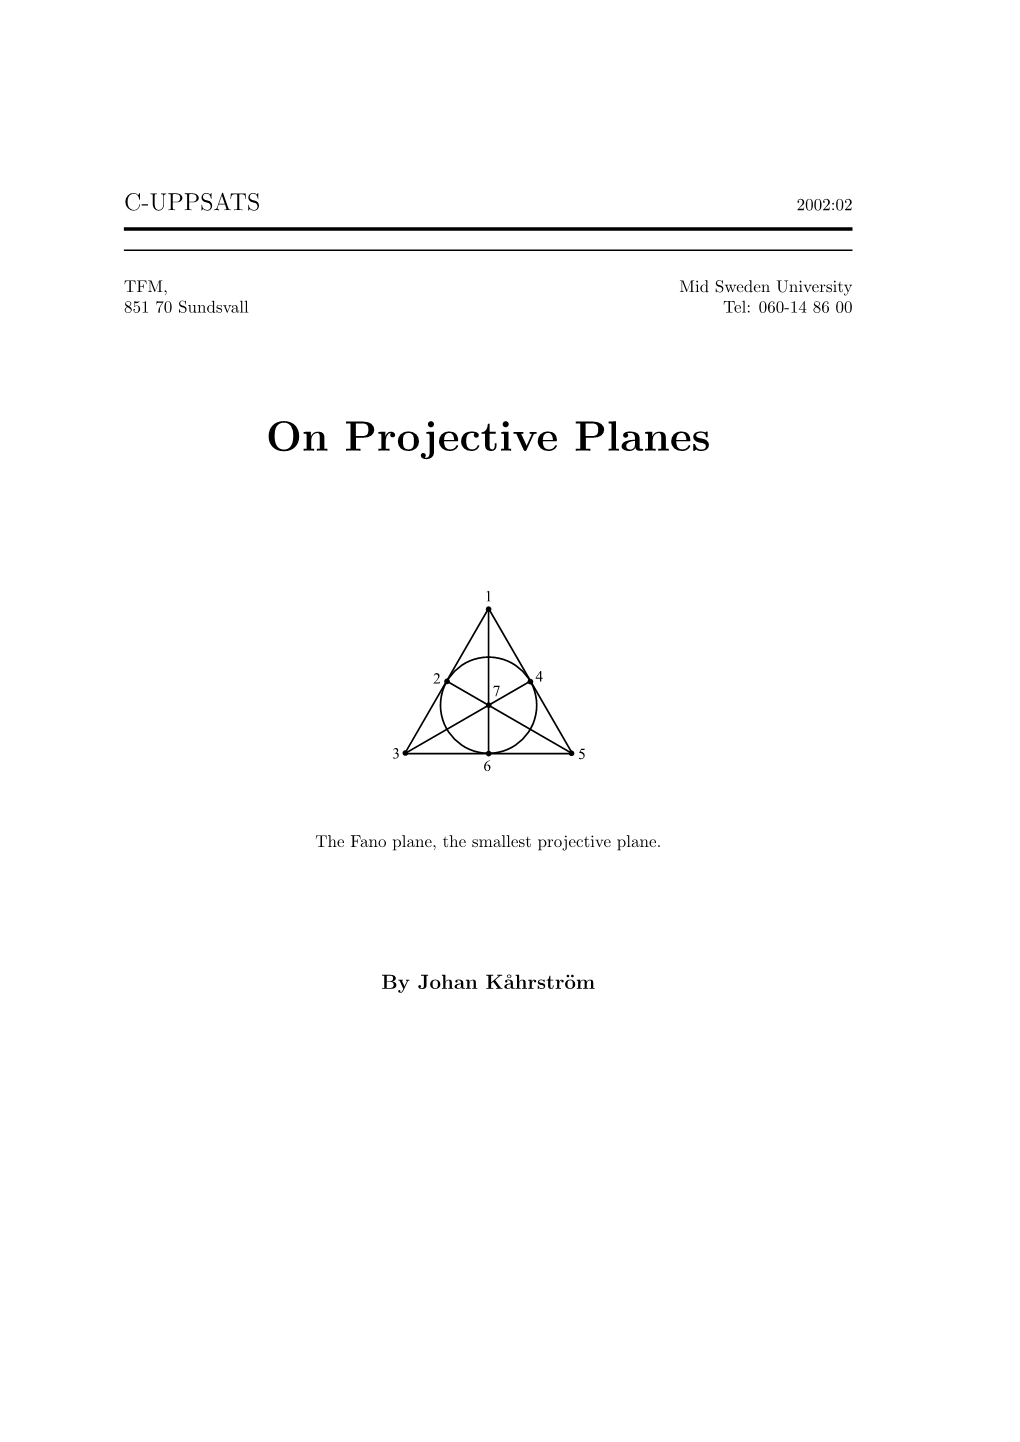 On Projective Planes